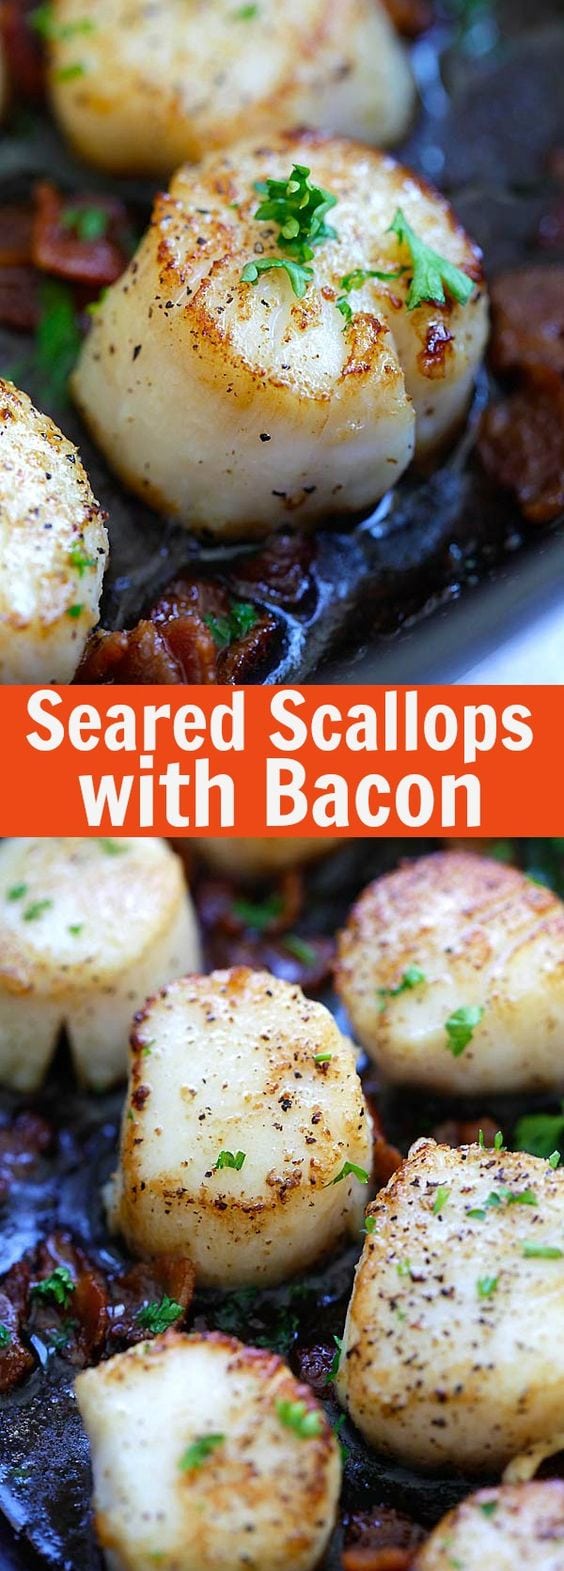 Seared Scallops with Bacon – easy seared scallops with crispy bacon bites in butter and lemon. Succulent, juicy, restaurant quality and much cheaper | rasamalaysia.com